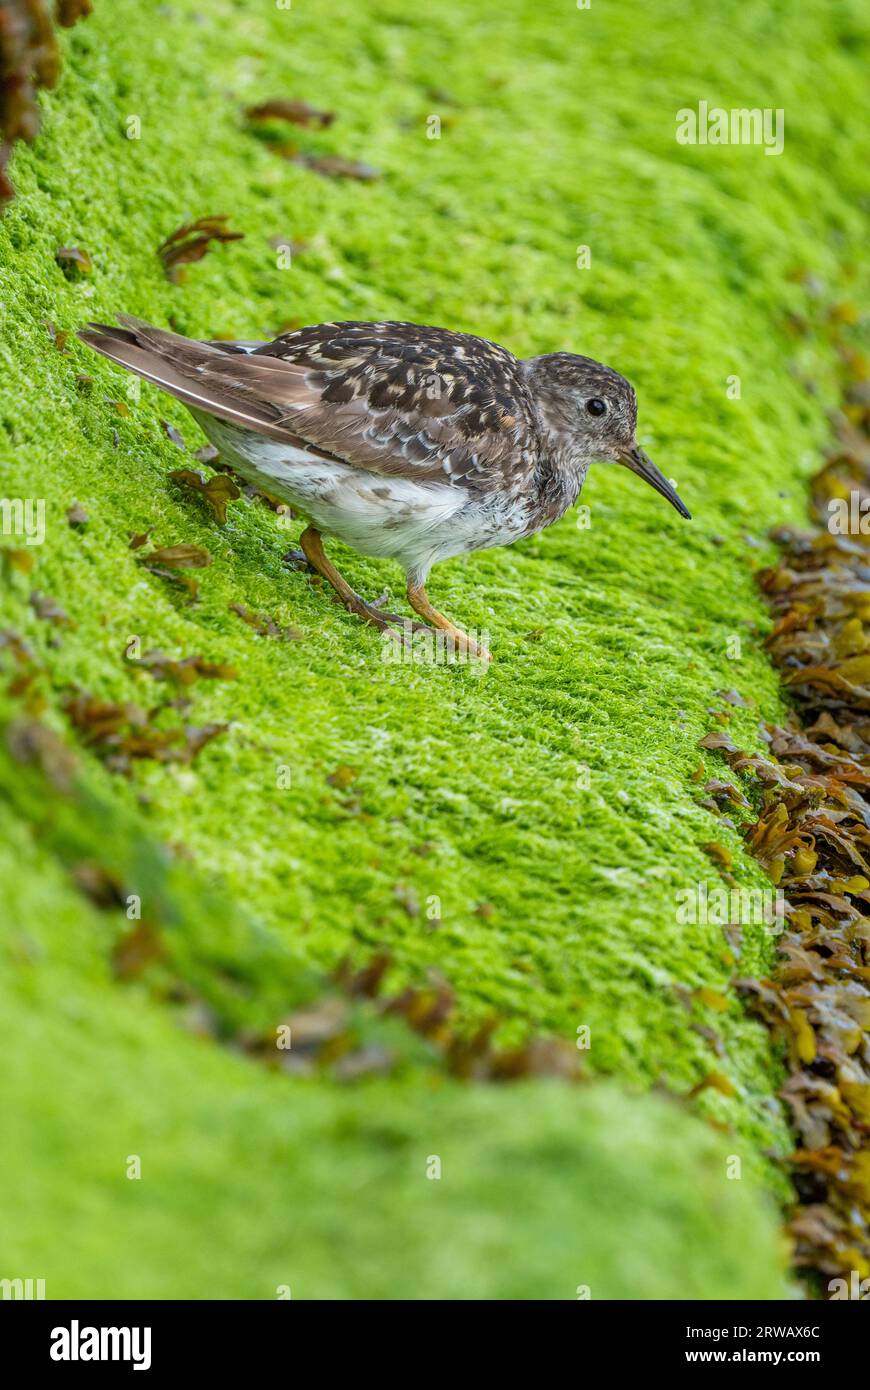 Purple Sandpiper, a red listed bird in the UK, sitting on a blanket of moss/algae along a British coast. Calidris maritima. Species of wader. Stock Photo